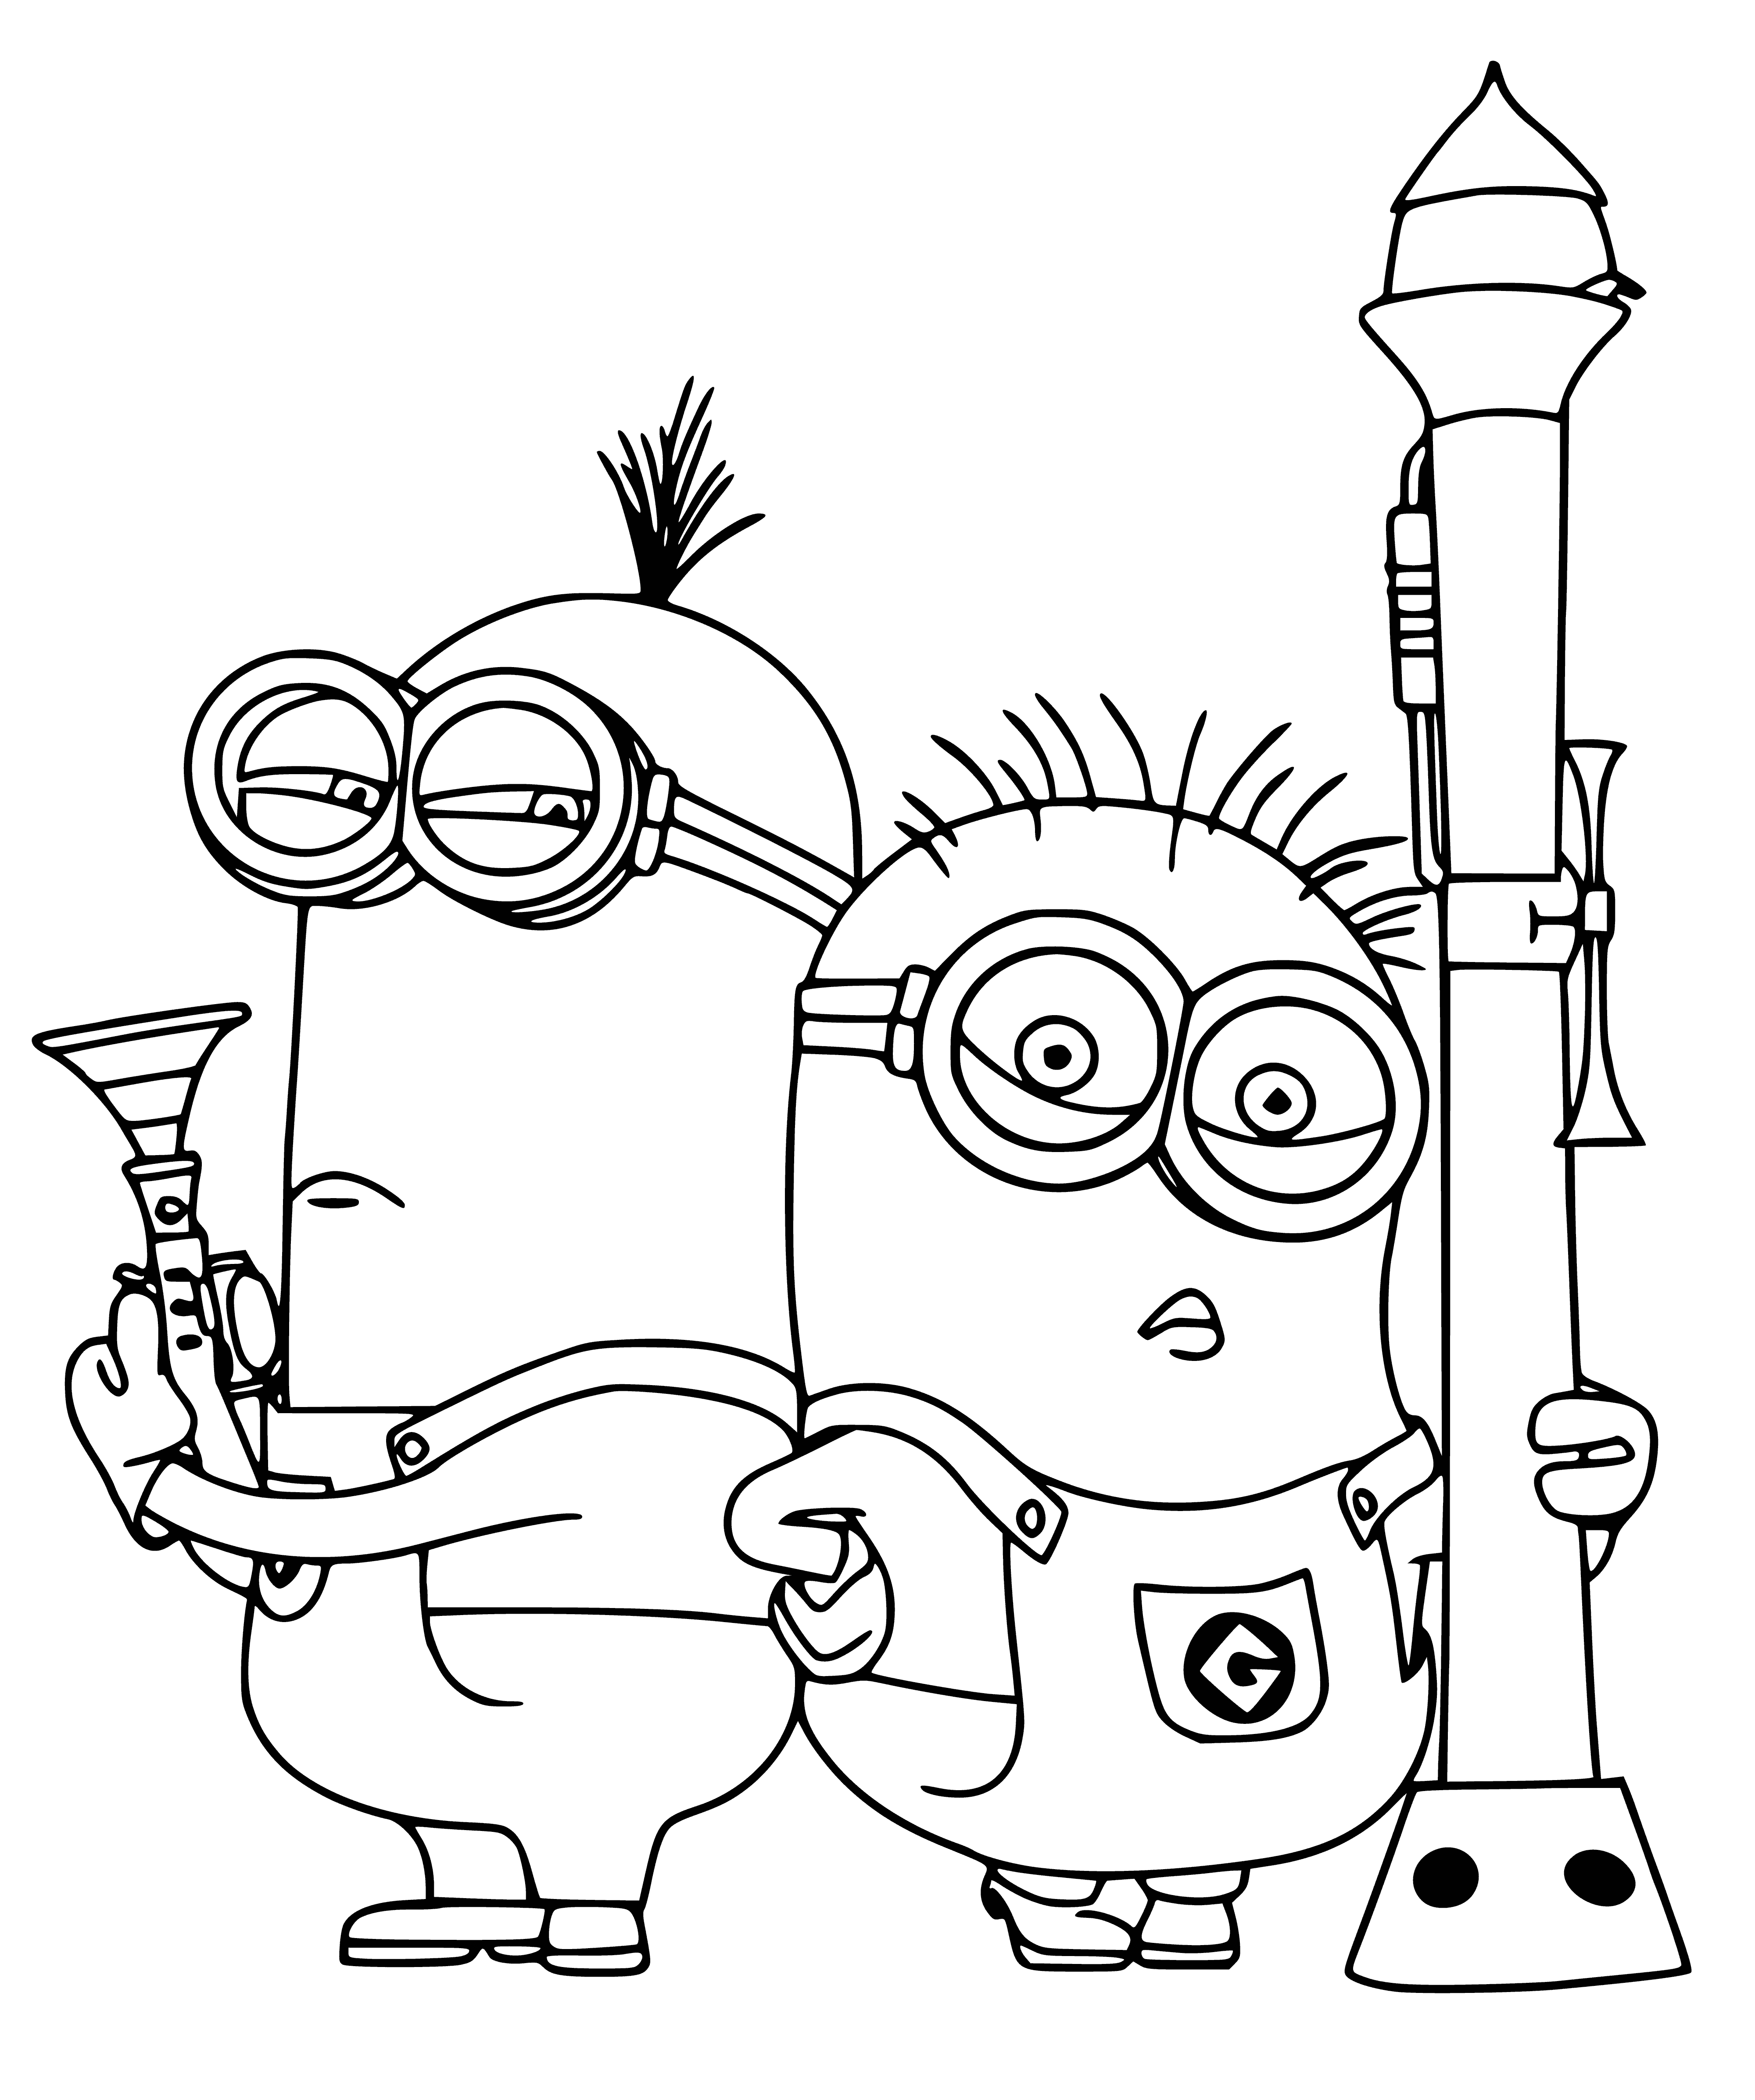 Minions with weapons coloring page